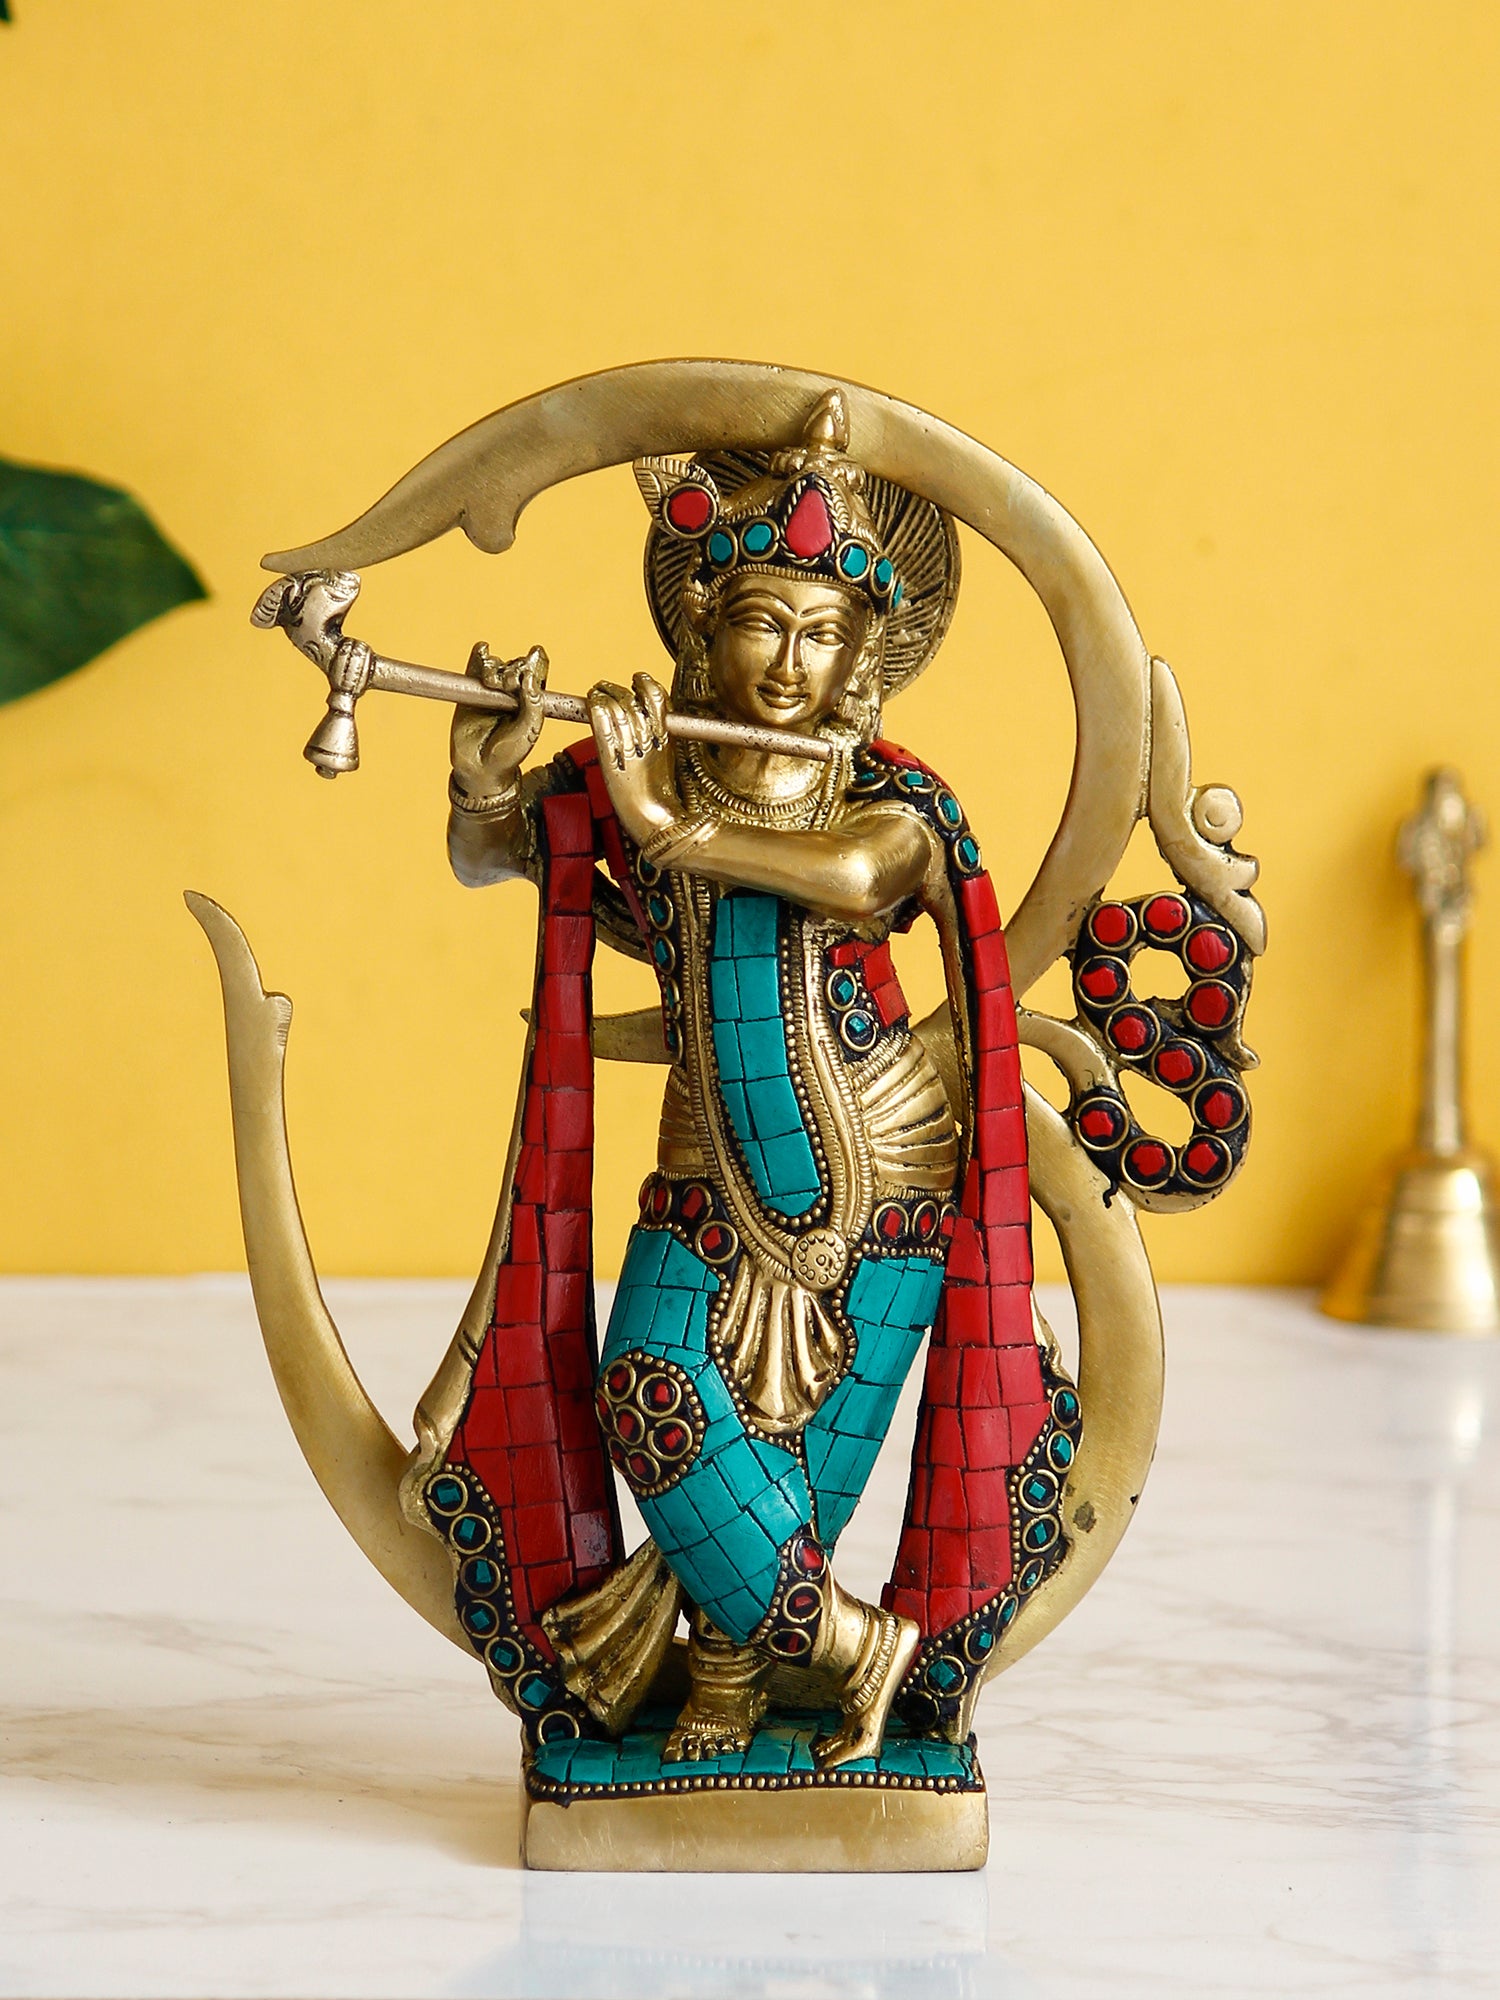 Decorative Golden Brass Lord Krishna Playing Flute with Om Symbol Idol with Colorful Stone Work